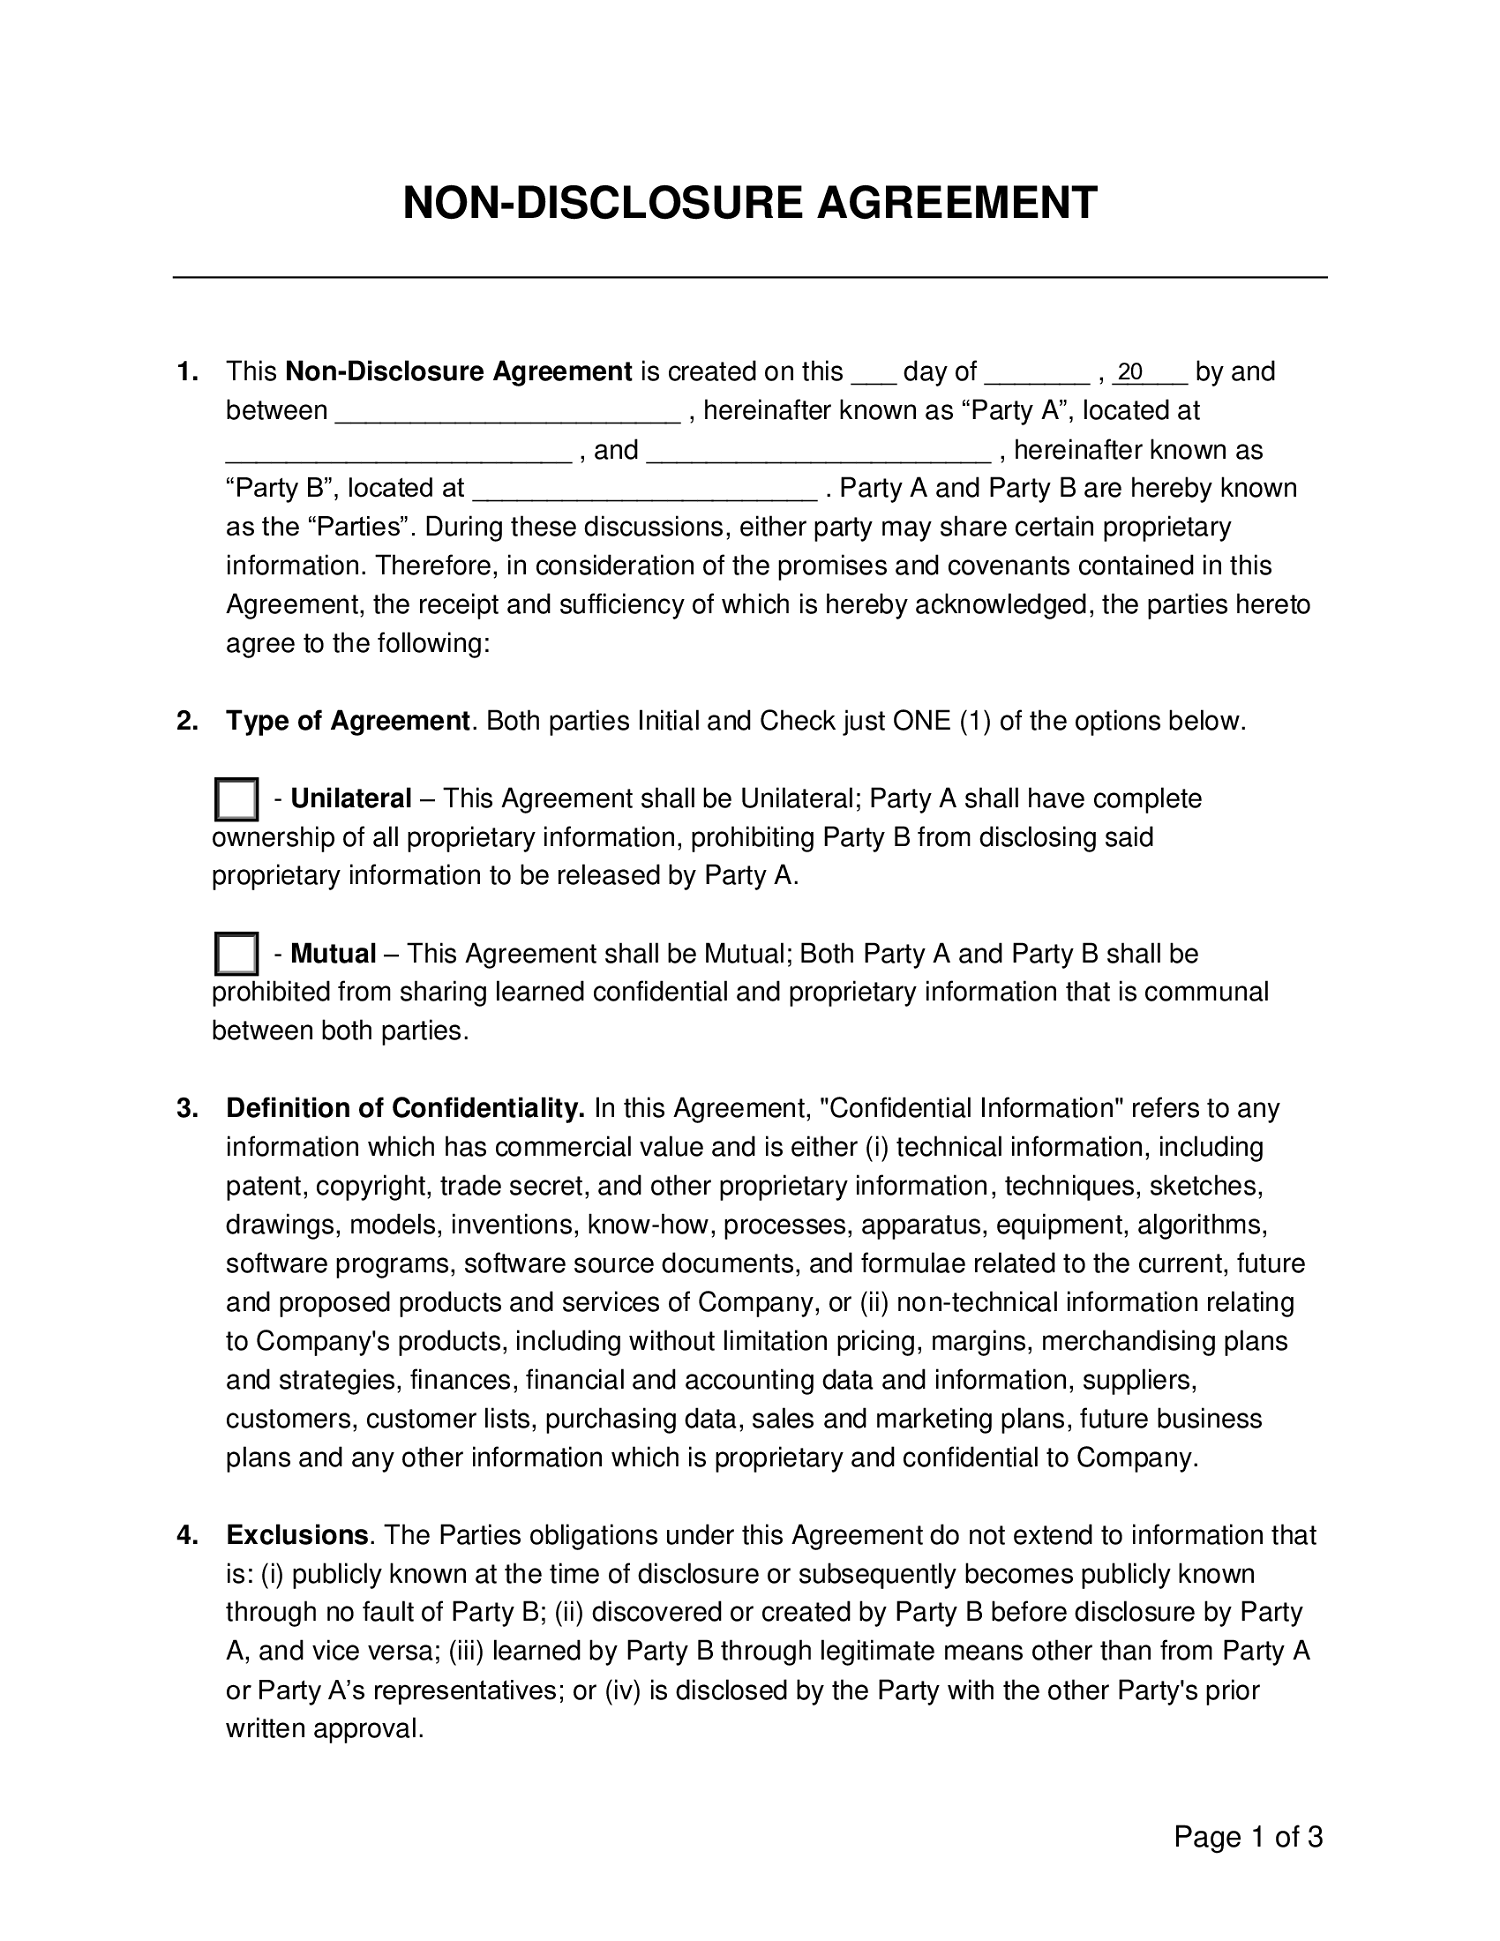 Non-Disclosure Agreement on PDFLiner